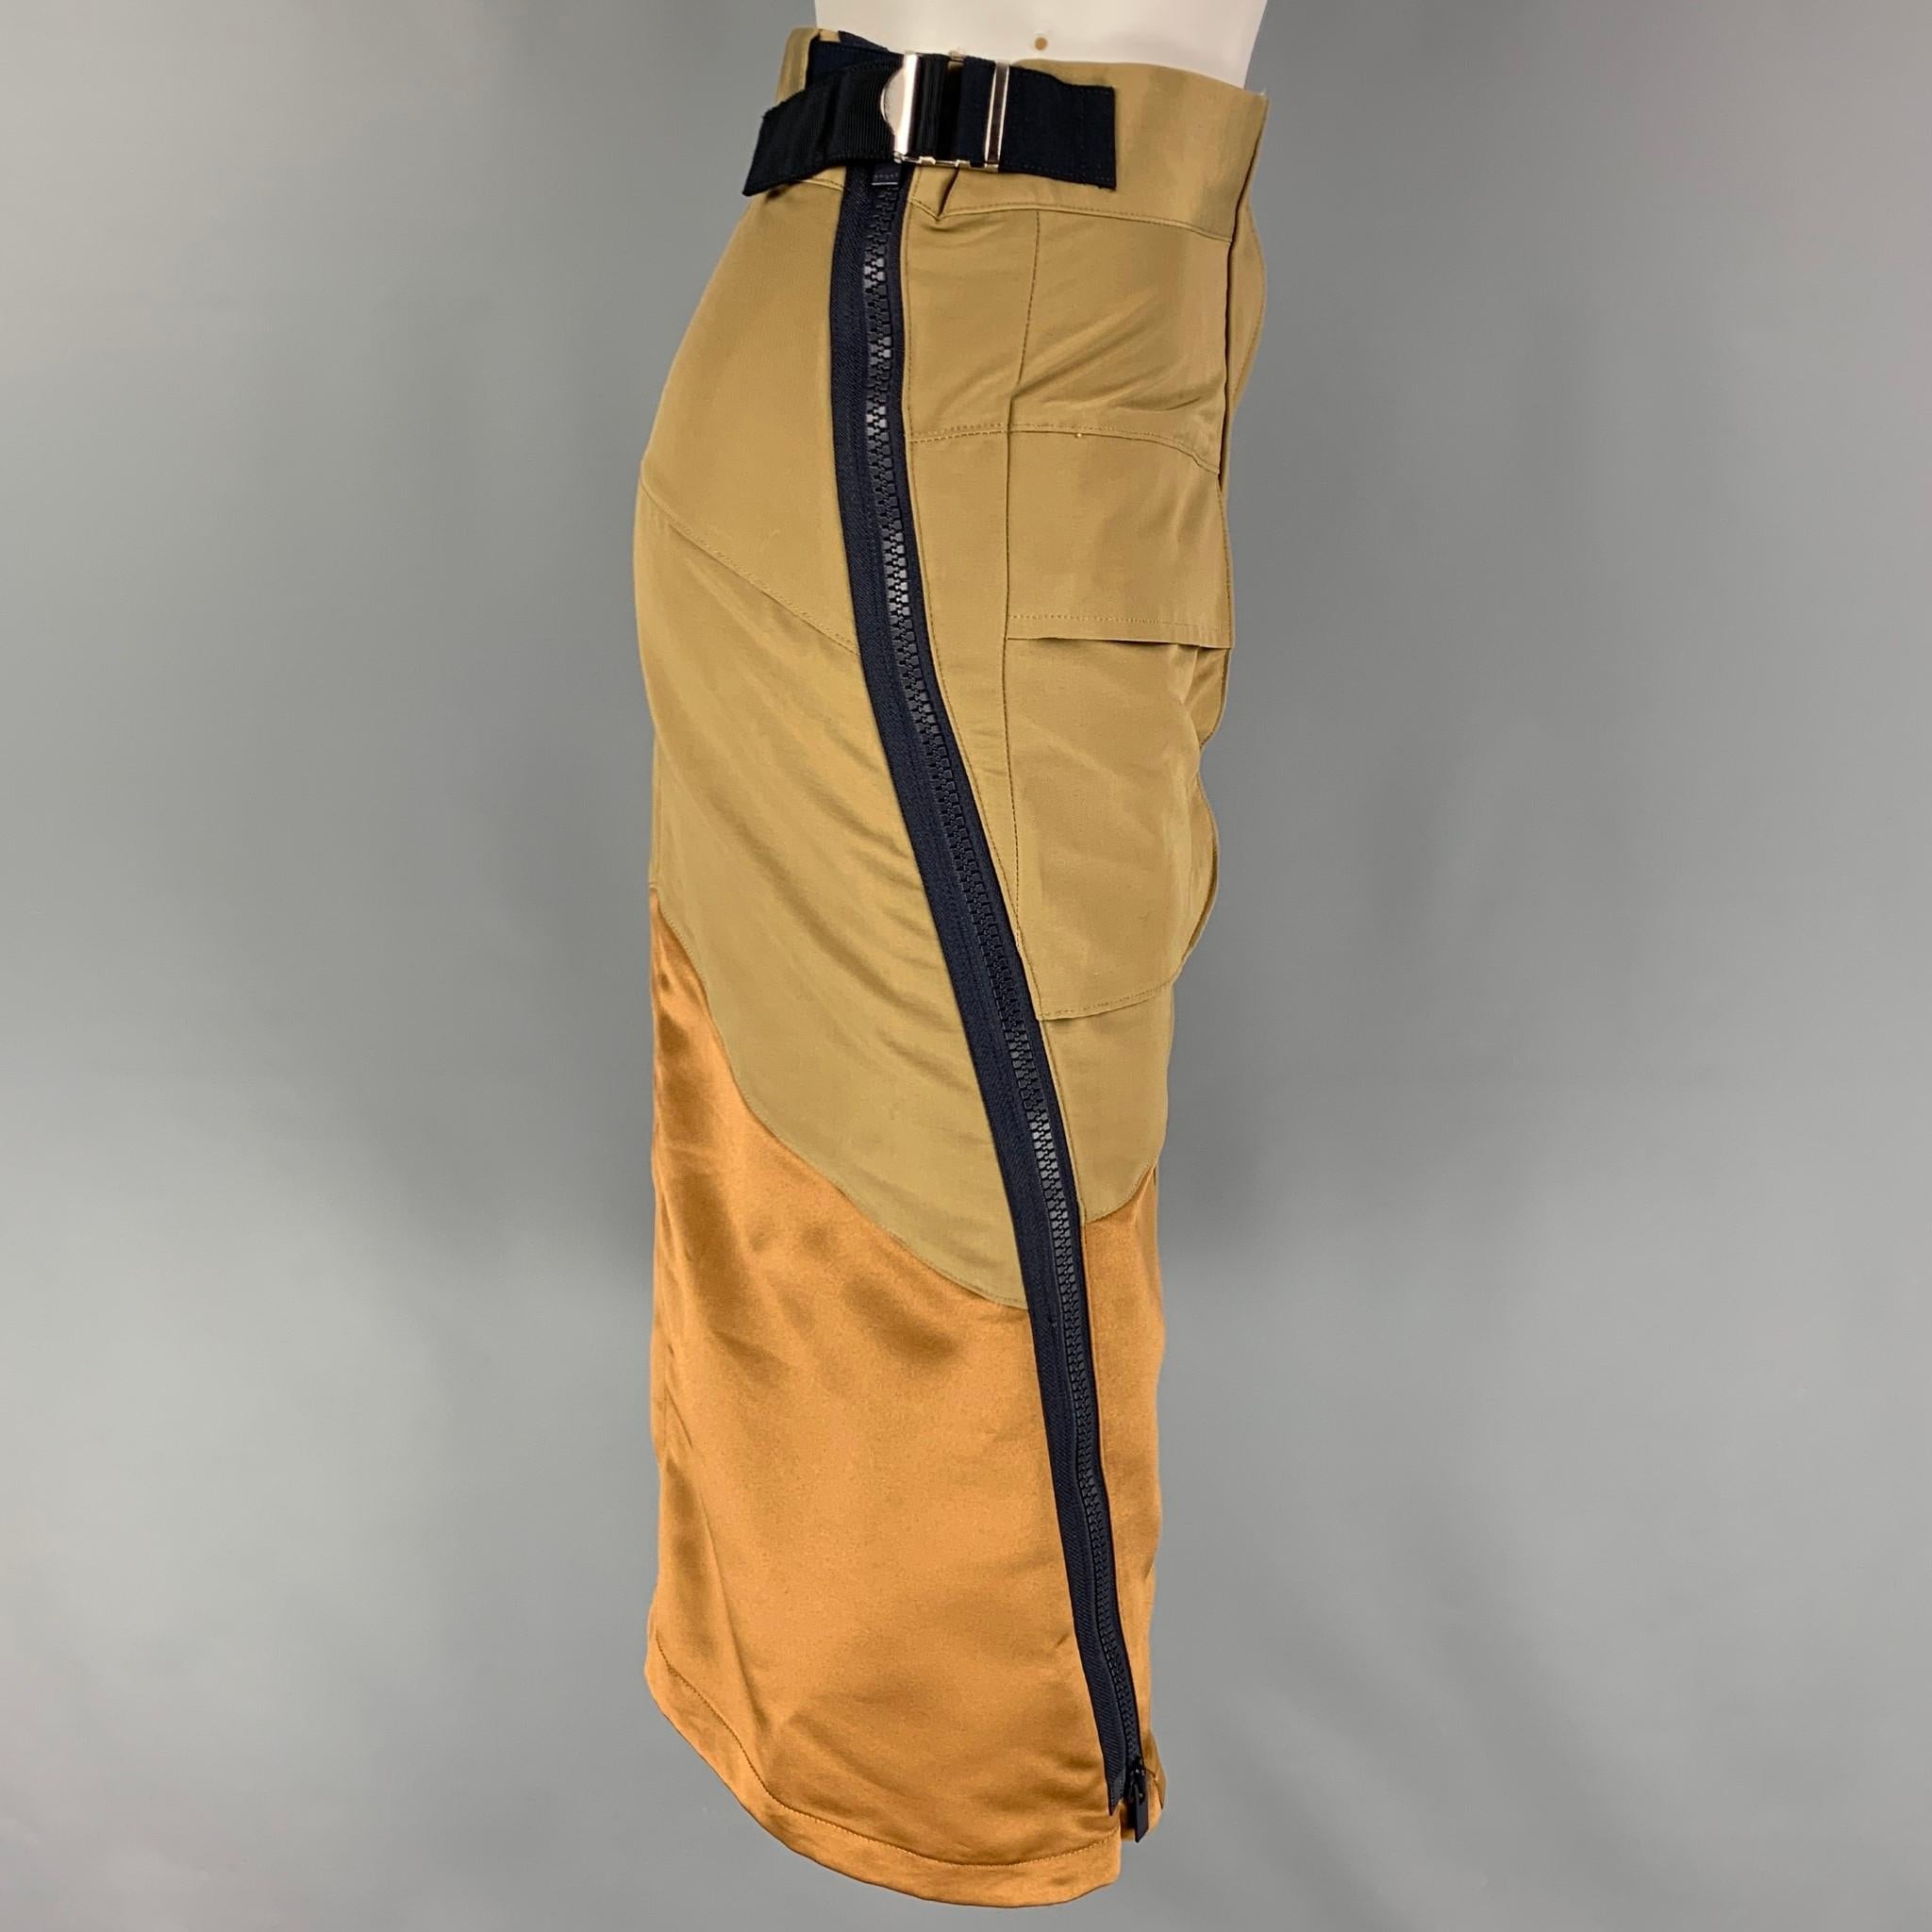 SACAI skirt comes in a khaki & gold color block cotton blend featuring a pencil style, patch pockets, exposed zipper details, adjustable side tabs, and a hidden zip & snap button closure. Made in Japan. 

Very Good Pre-Owned Condition.
Marked: